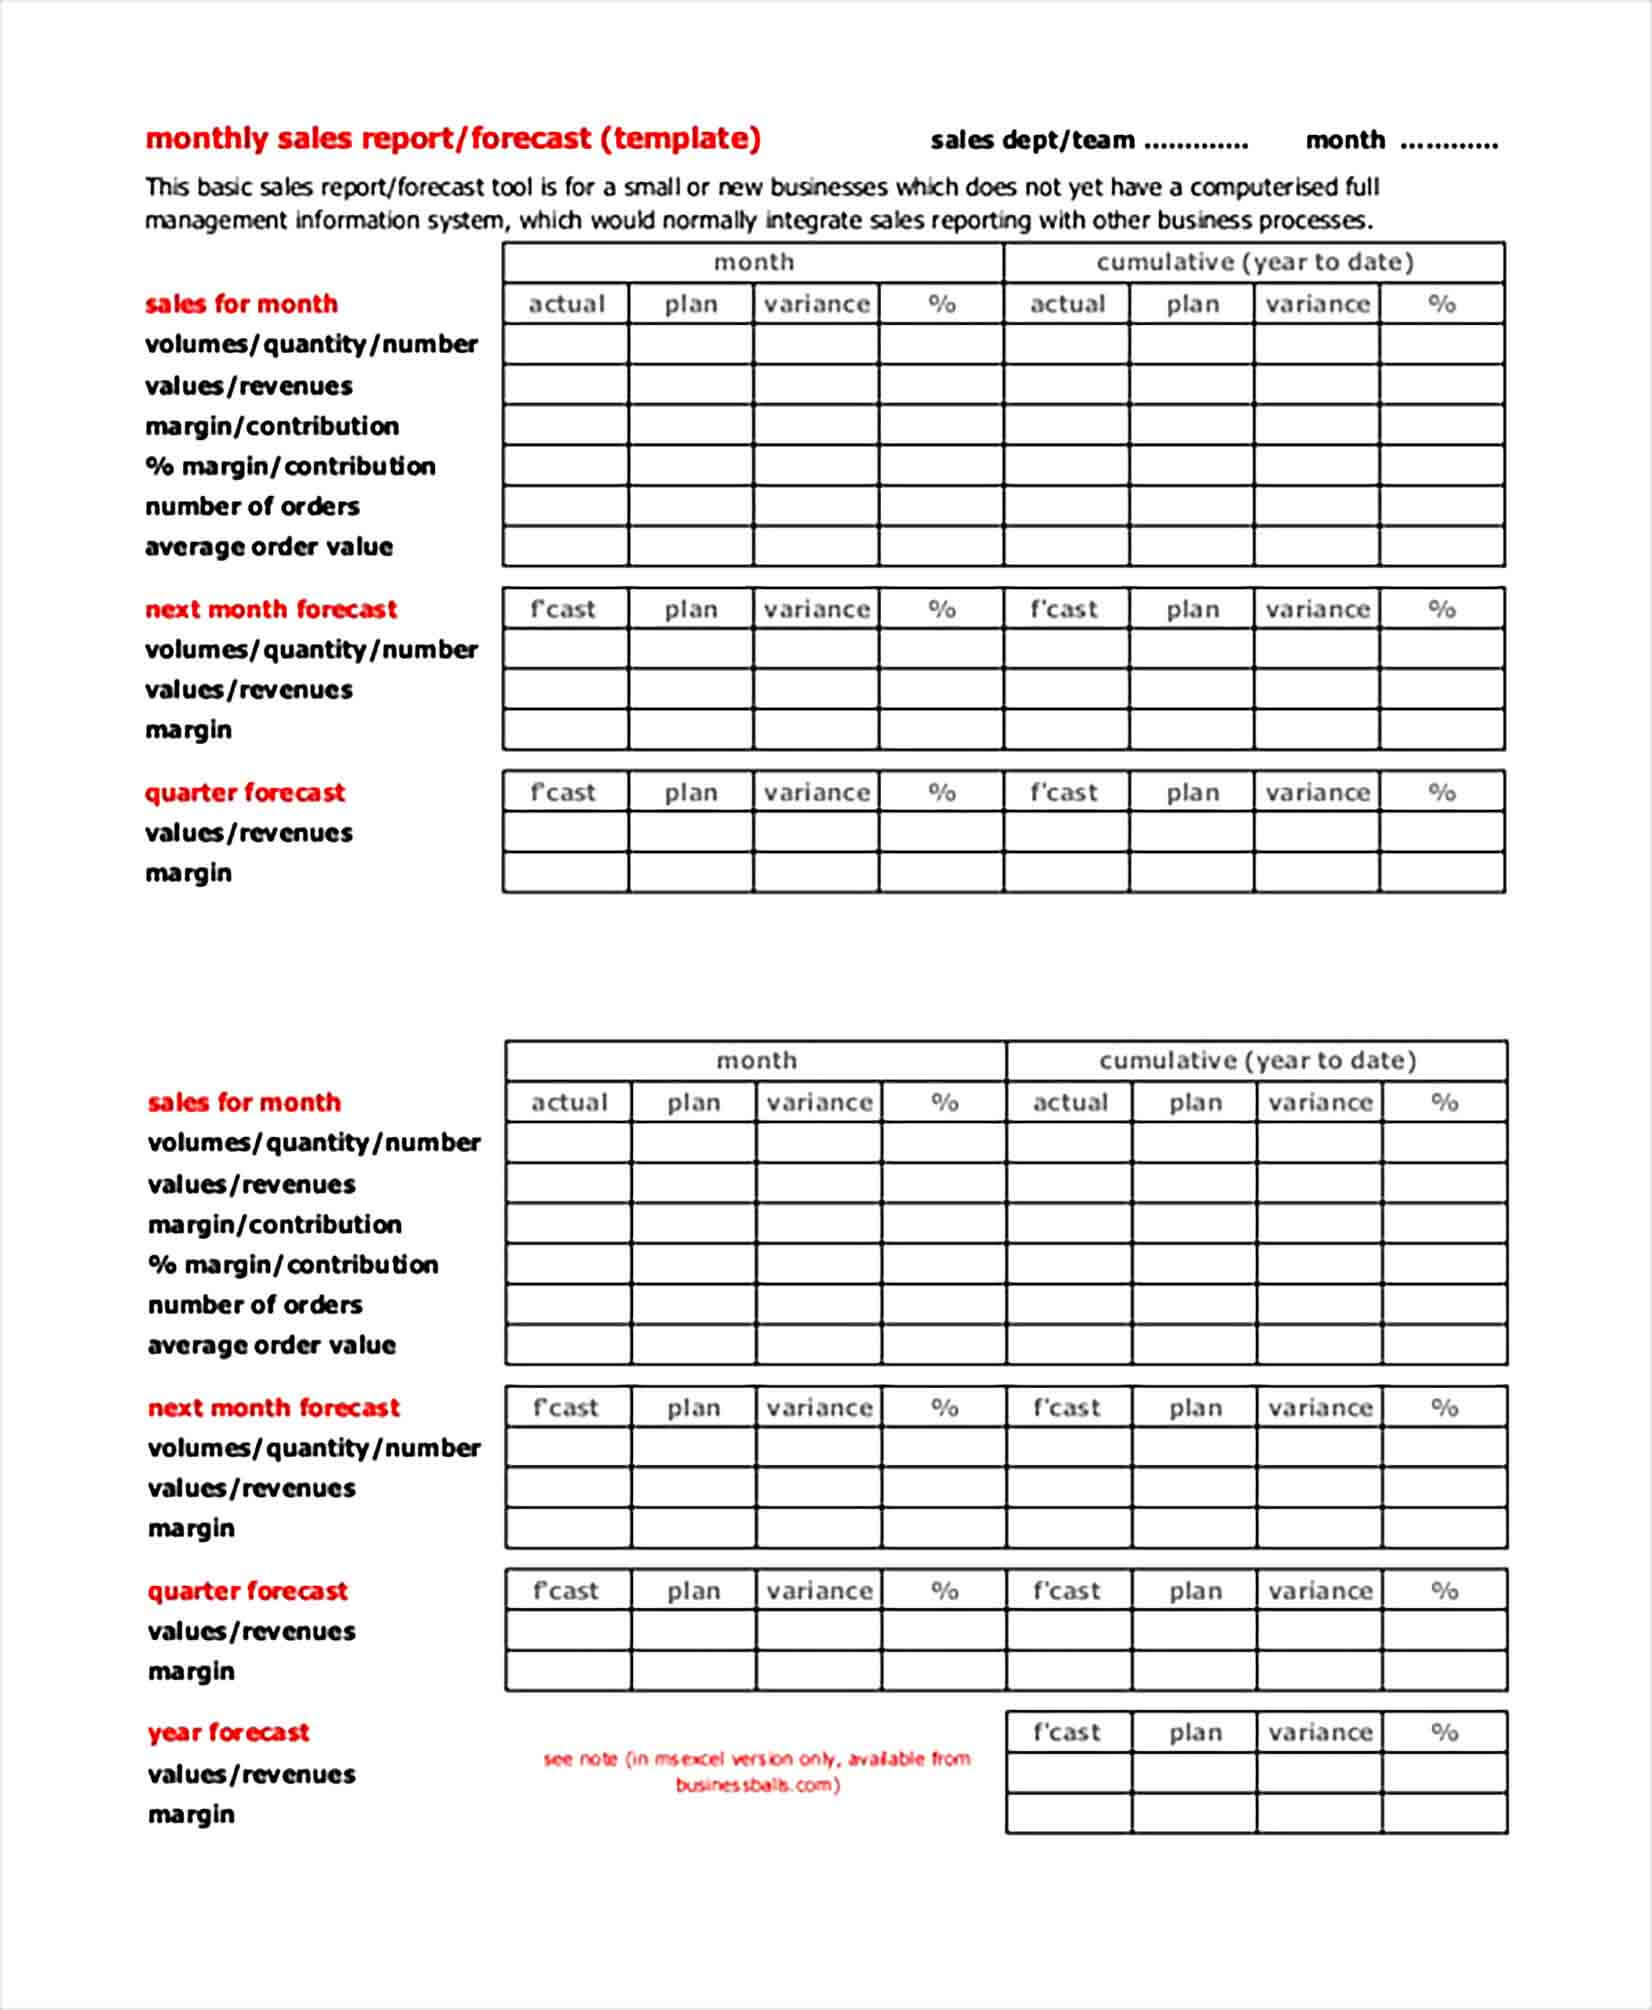 Sample Monthly Sales Report Forecast Template